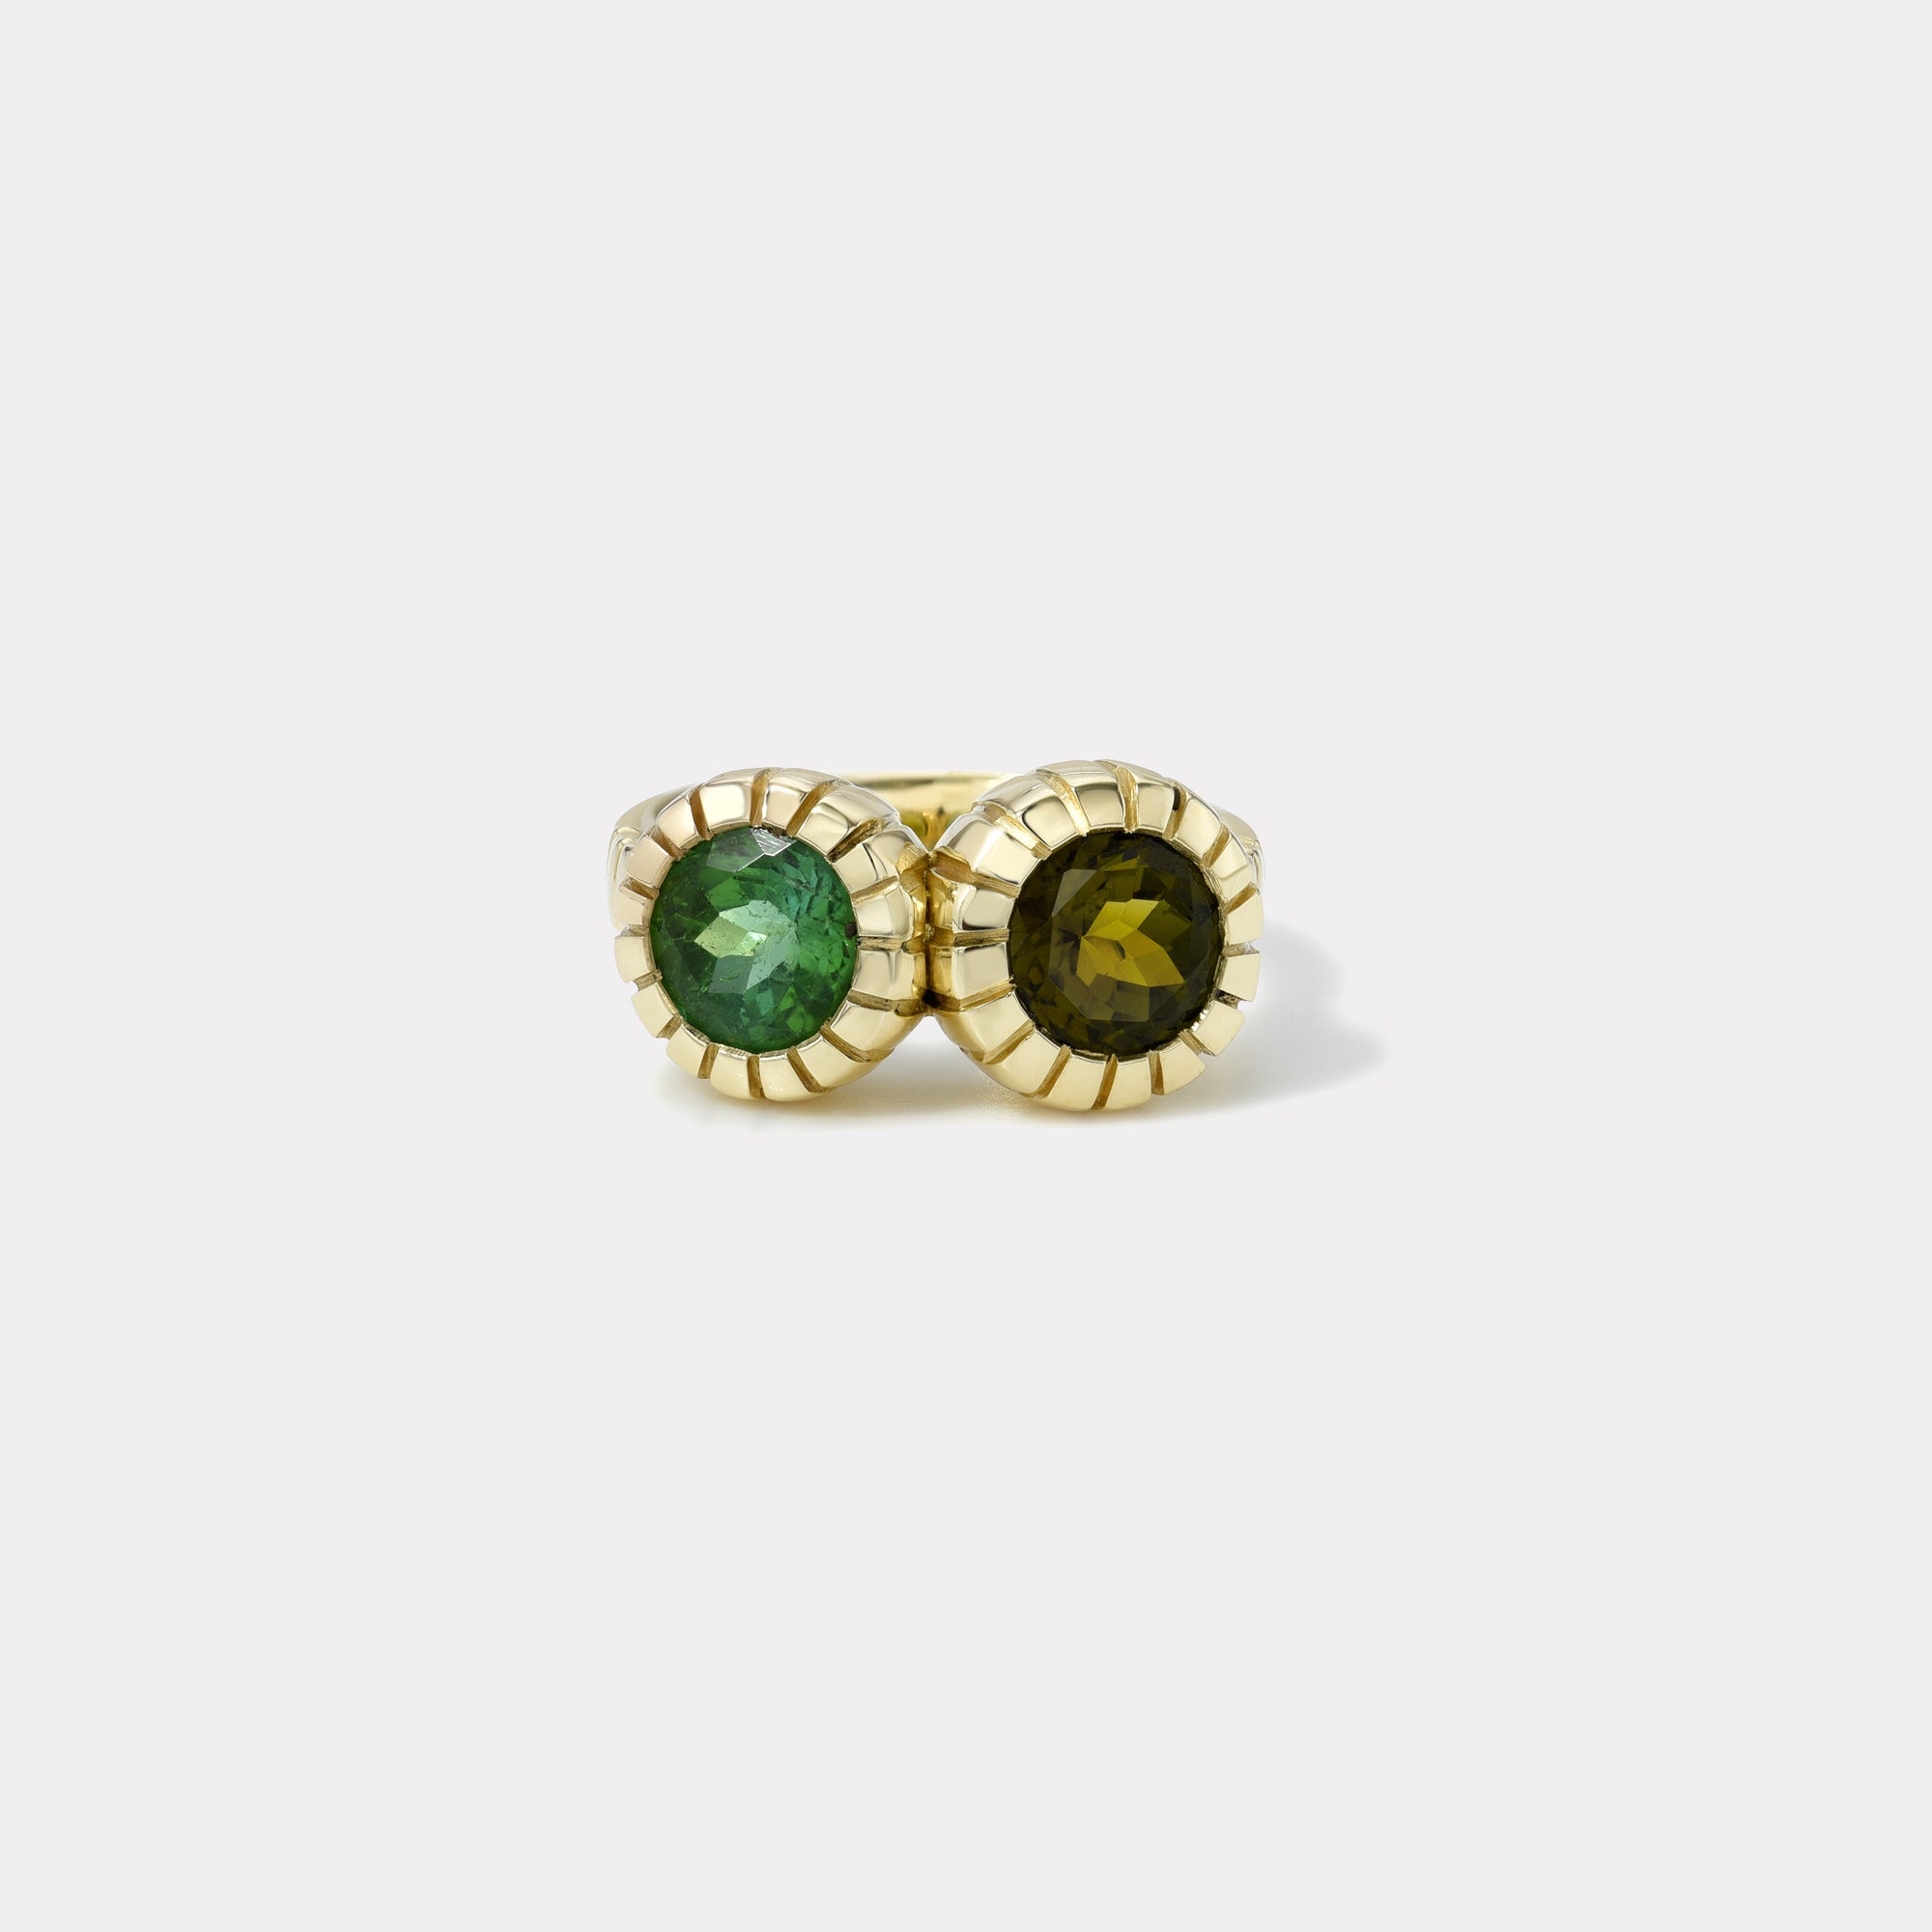 Double Stone 1.52ct Round Olive Green Tourmaline and 1.38ct Round Forest Green Tourmaline Heirloom Bezel Ring